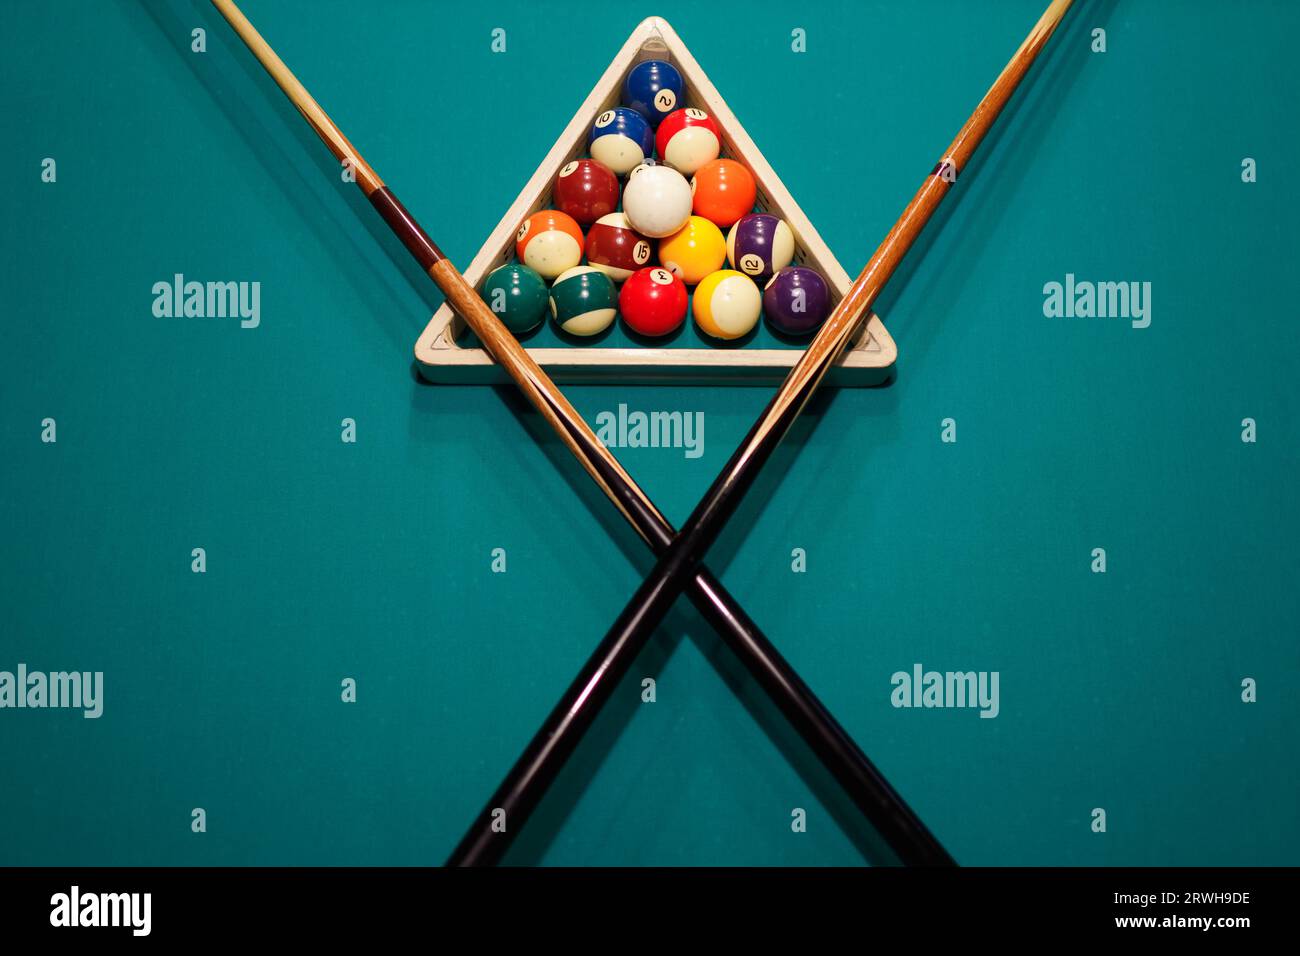 Billiard accessories balls and crossed cues on a billiard table Stock Photo